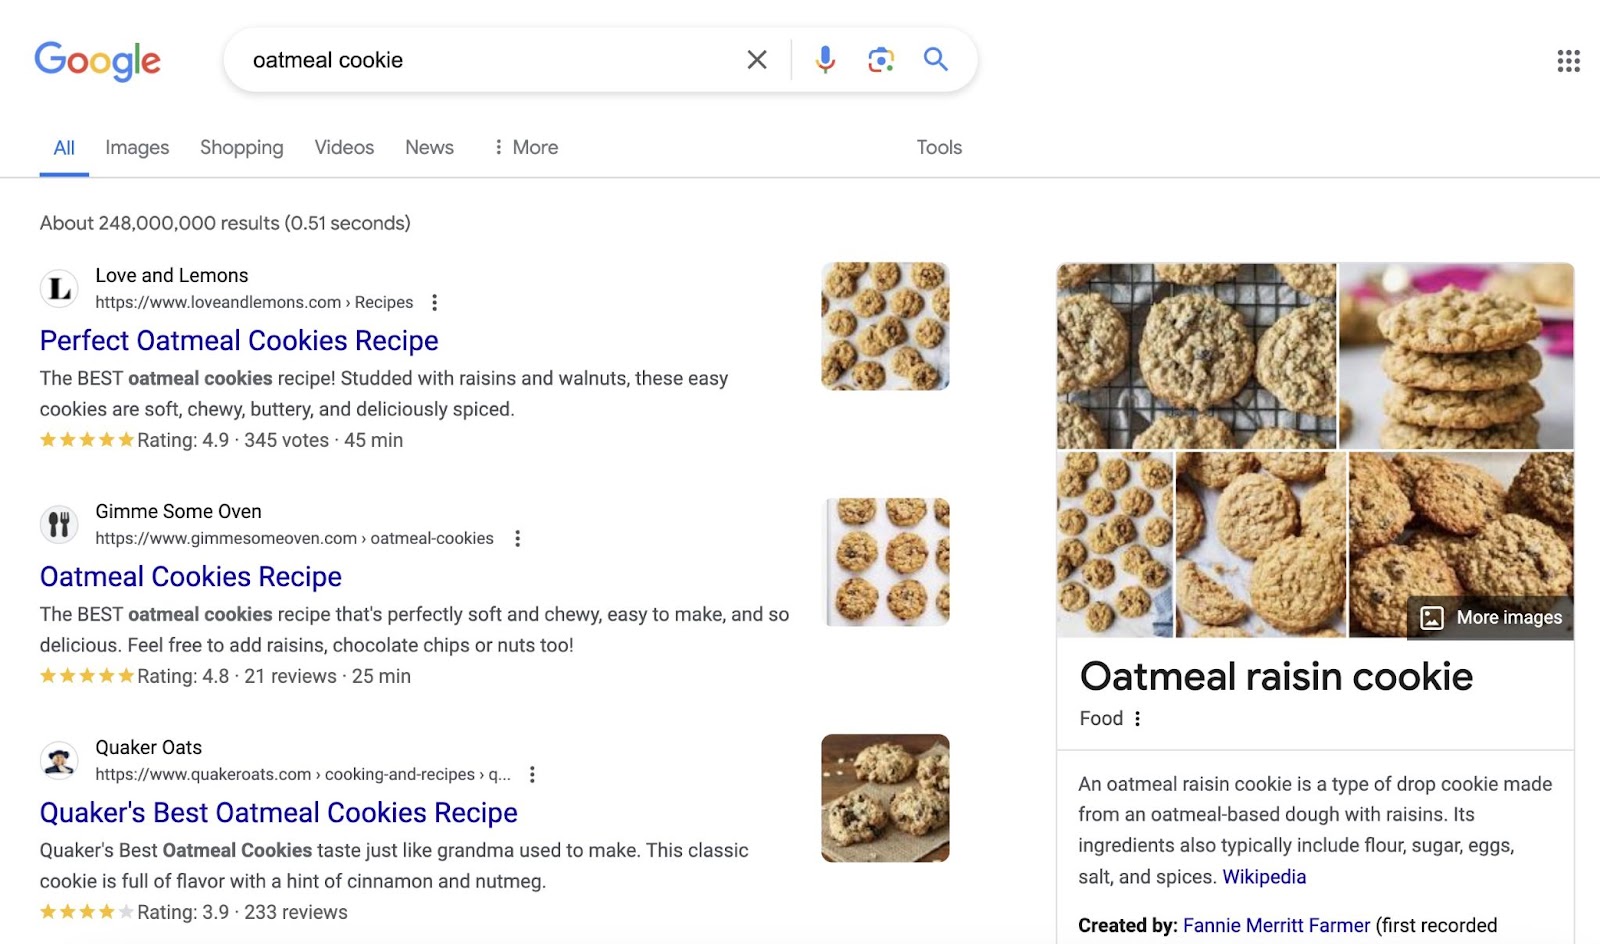 search results leafage   for "oatmeal cookie" shows oatmeal cooky  recipes ranking for apical  integrated  results